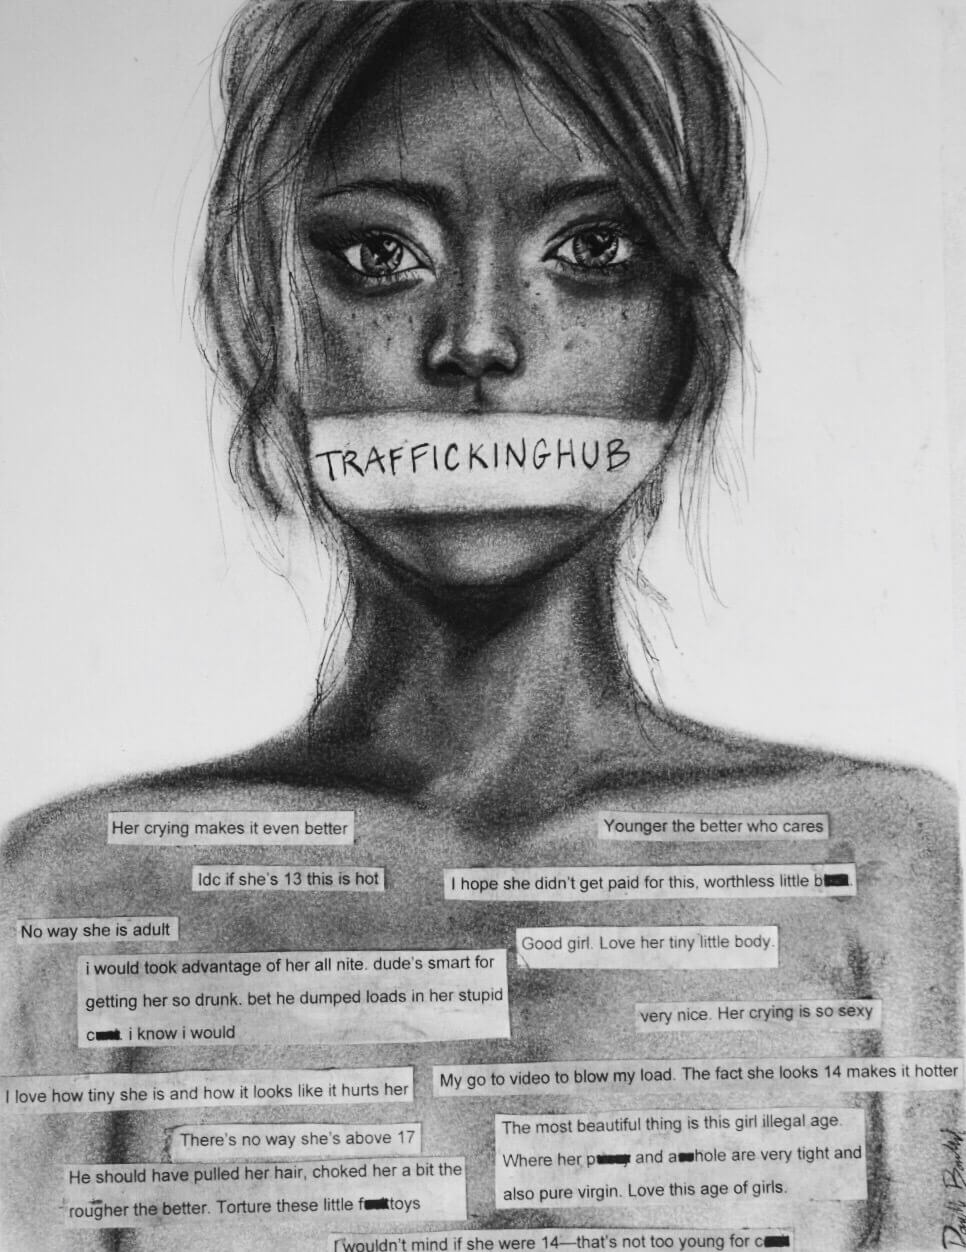 The Top Works of Art Inspired by Traffickinghub